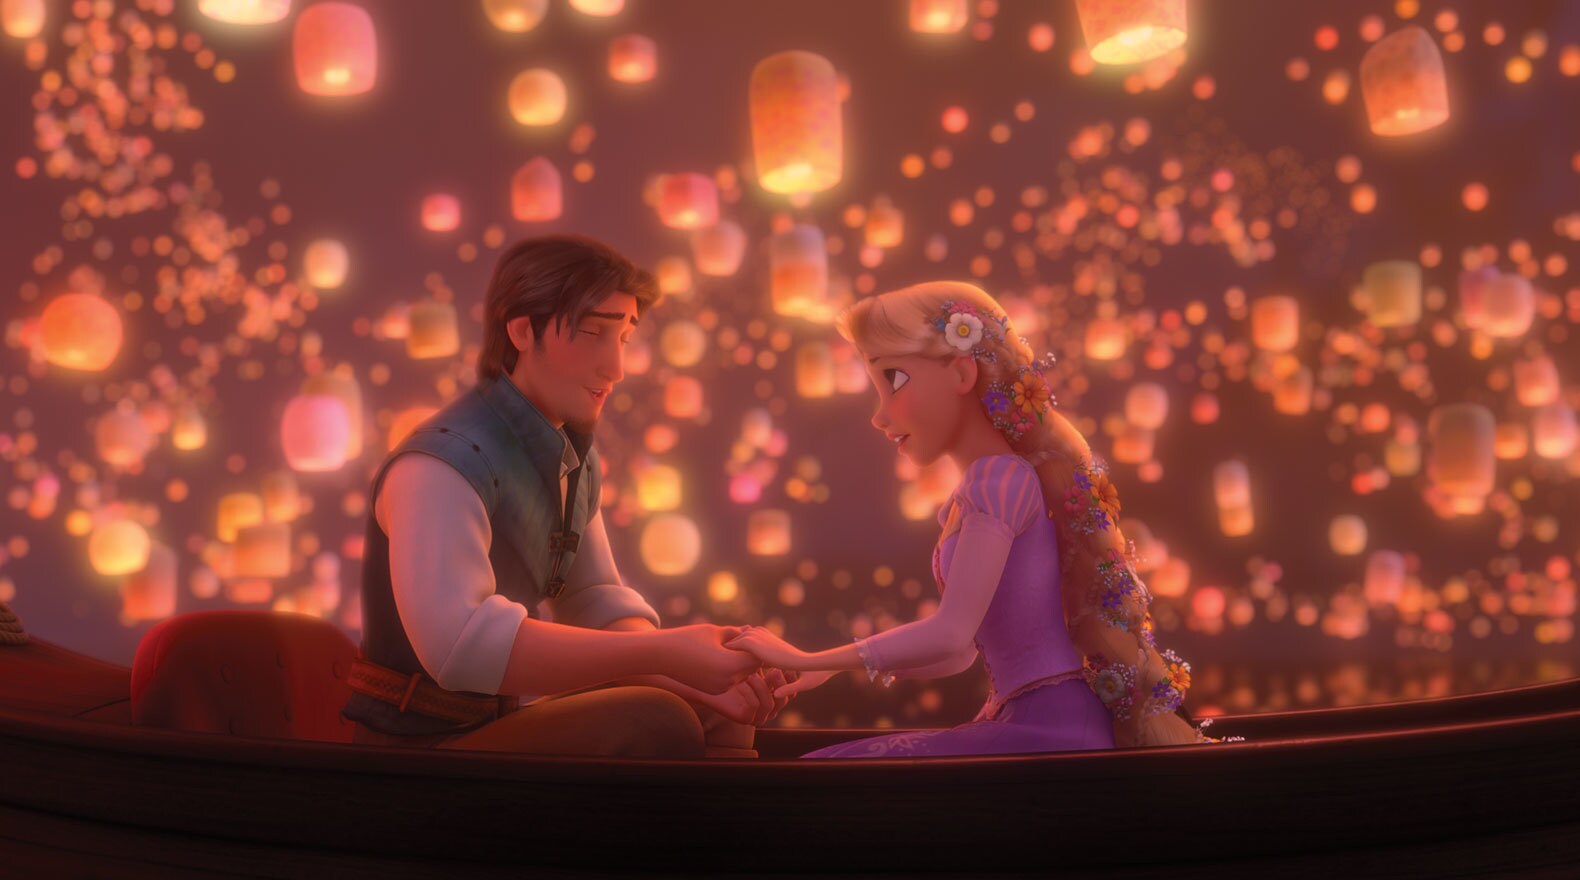 Flynn Rider and Rapunzel holding hands in a boat